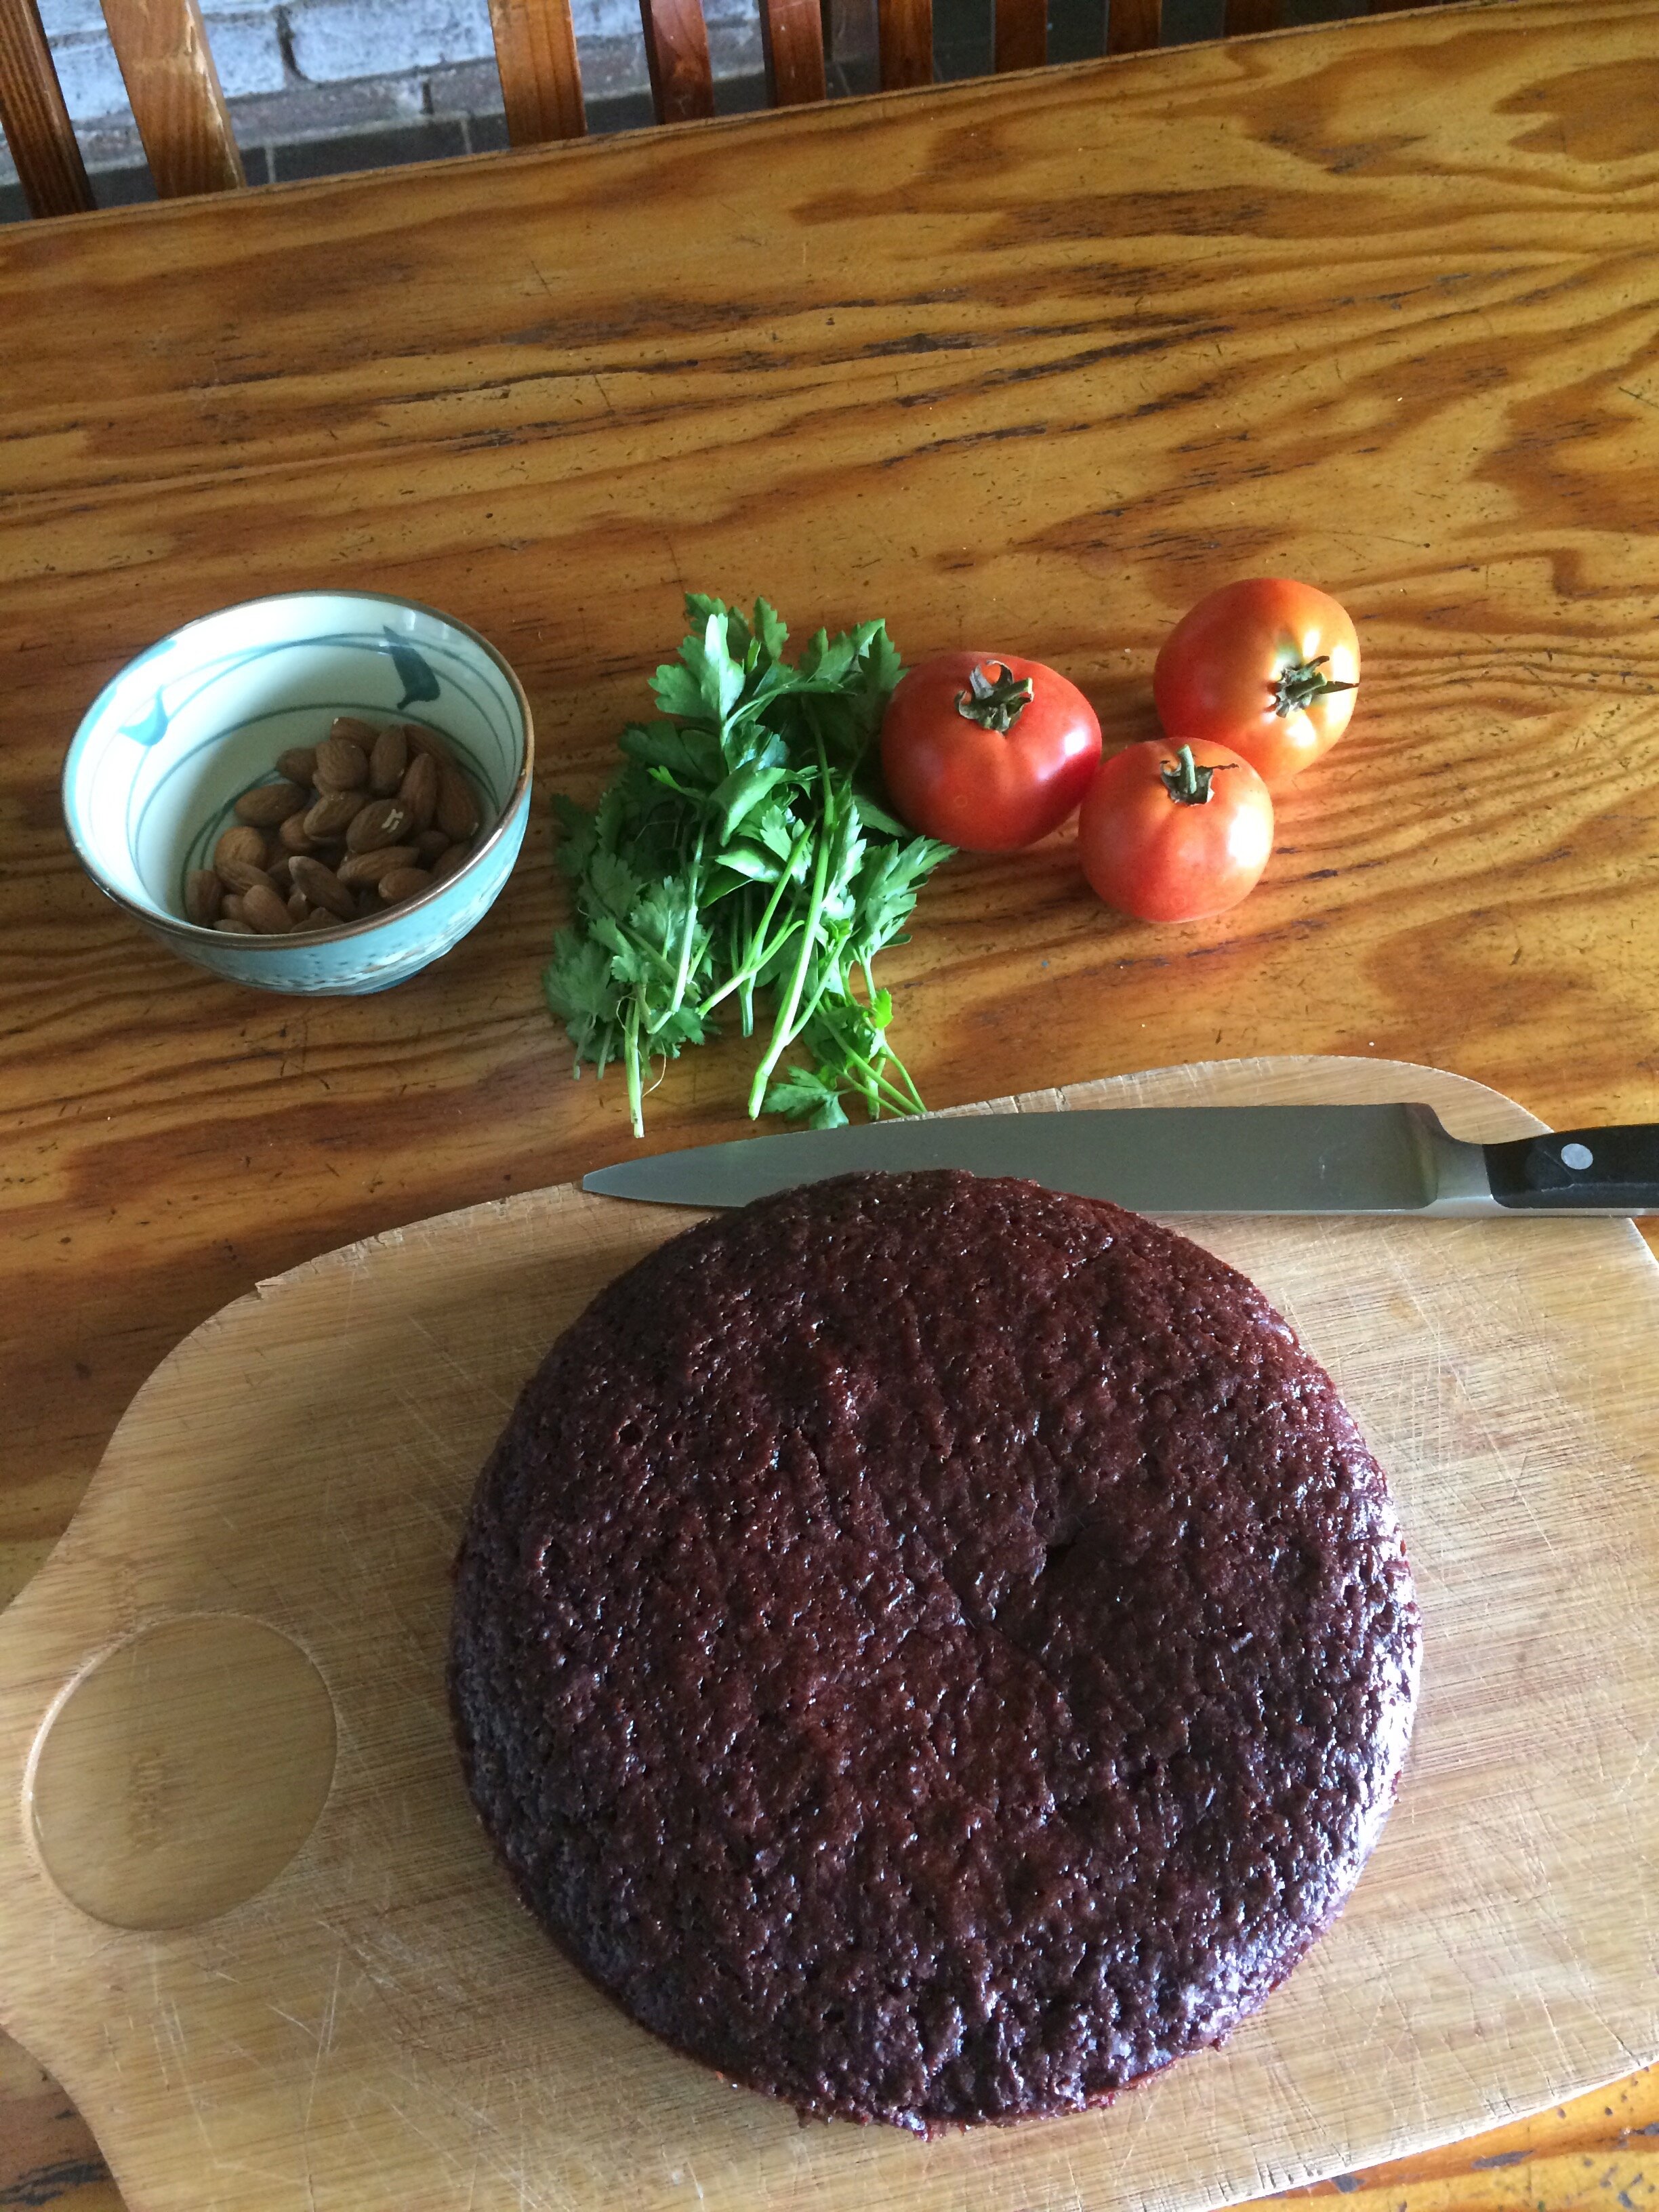 Top view of round brown cake on chopping board next to basil, tomatoes, bowl of nuts